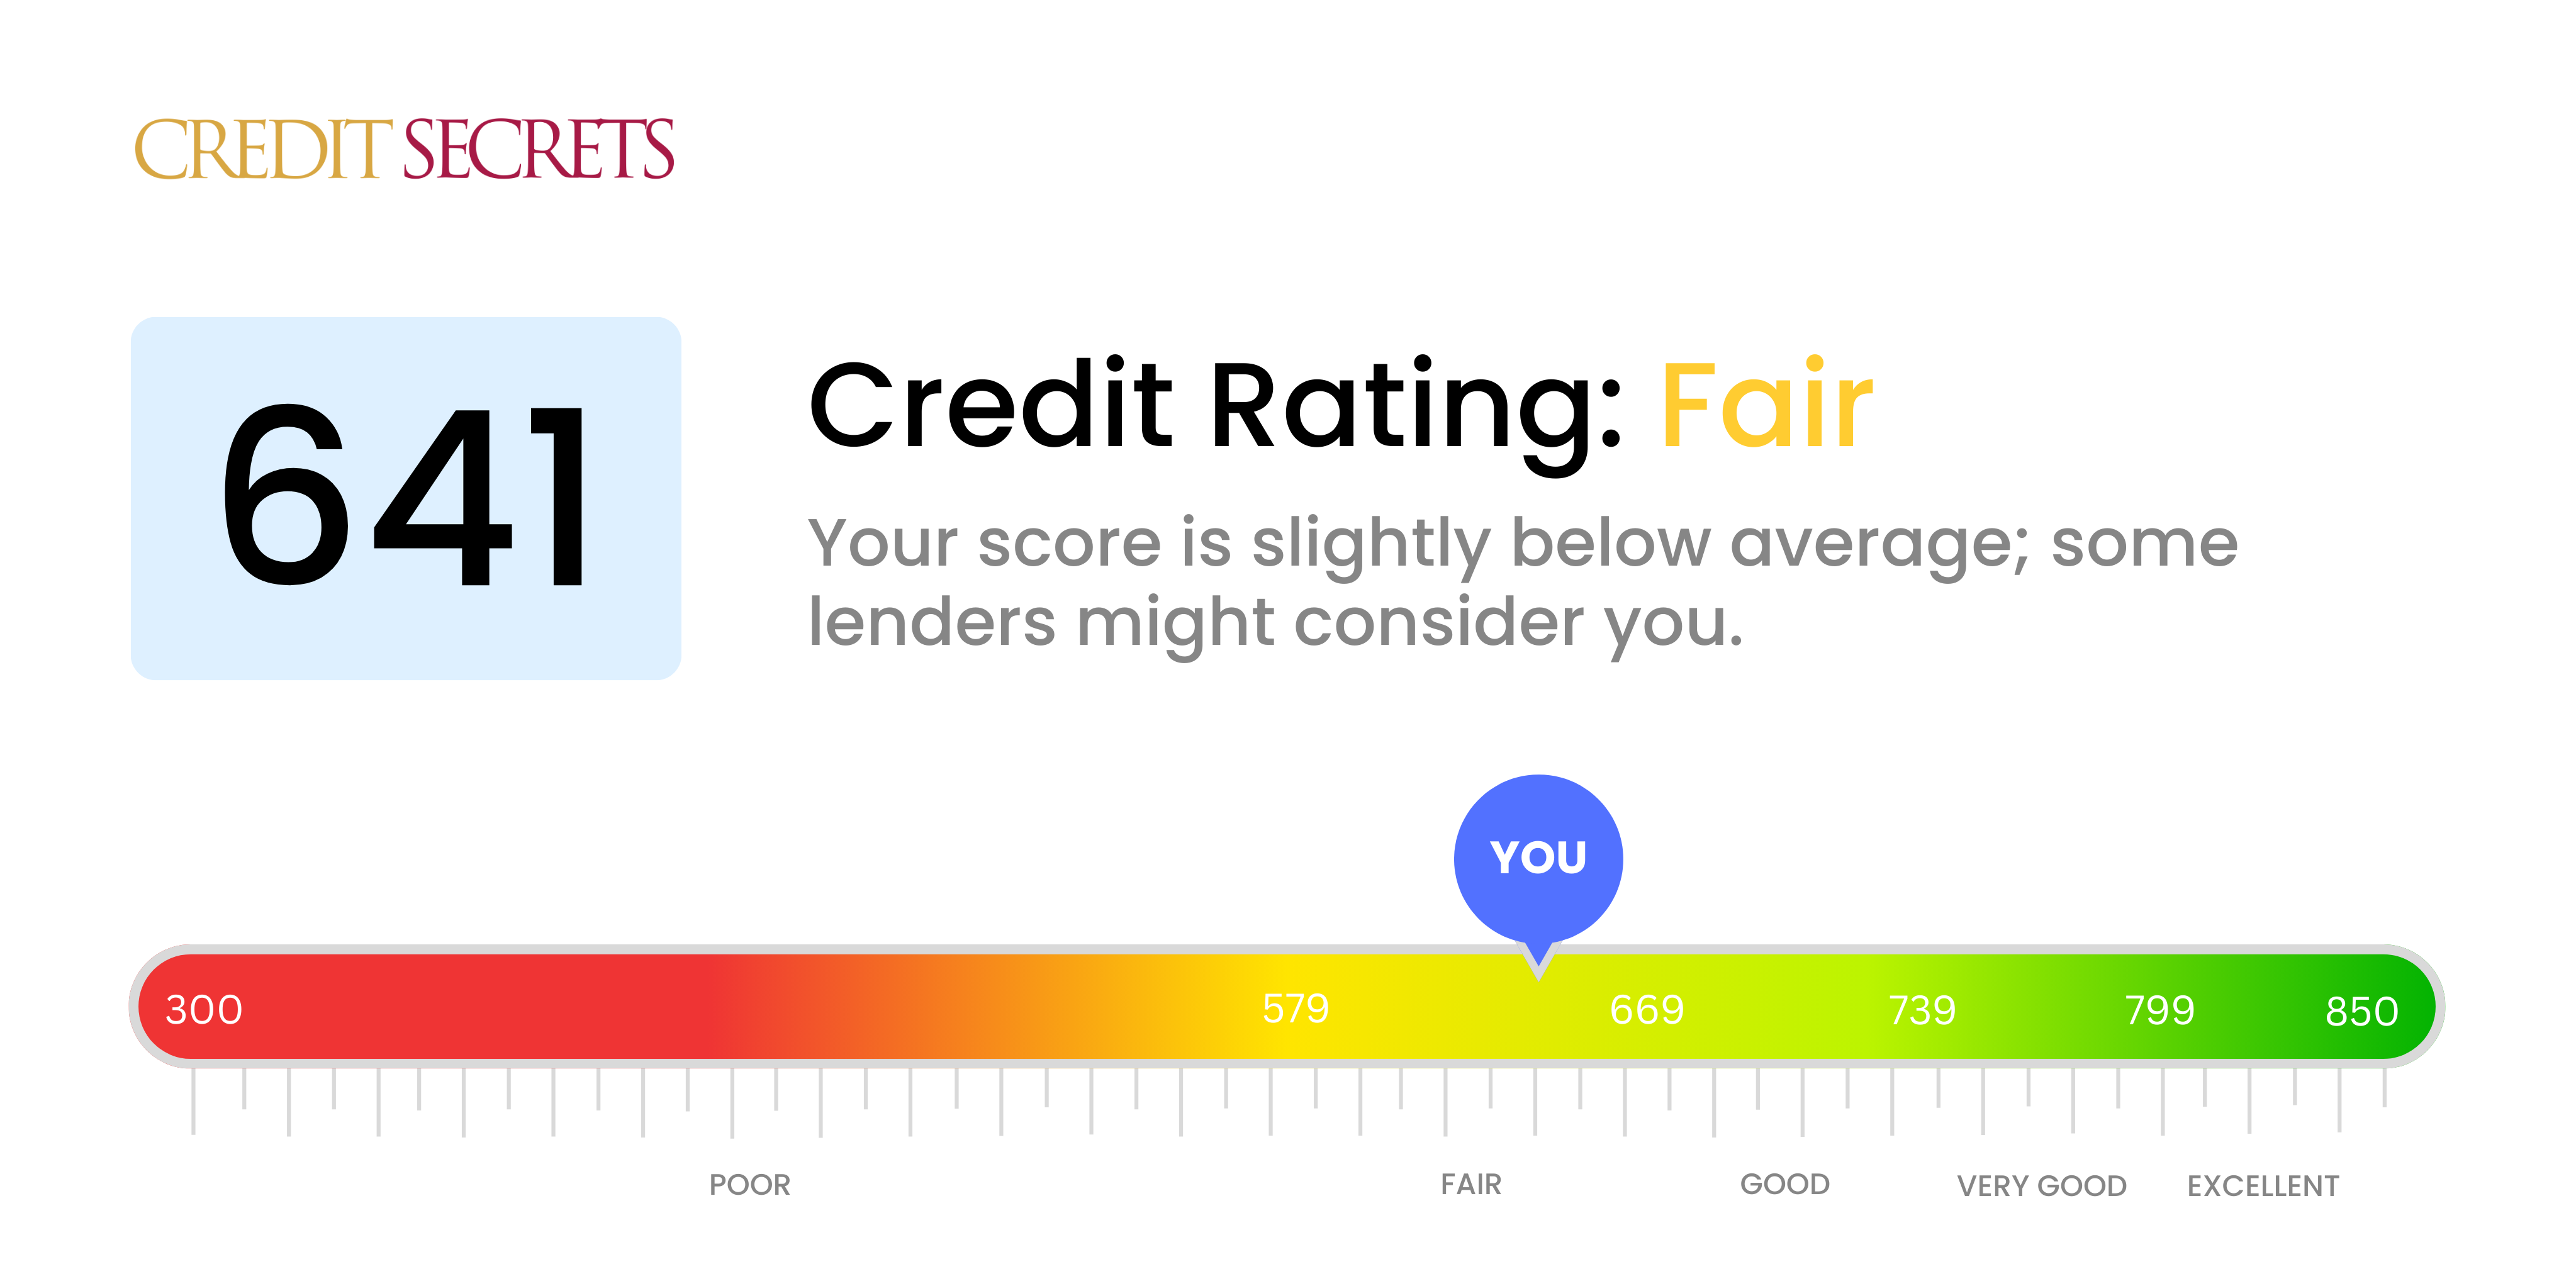 Is 641 a good credit score?